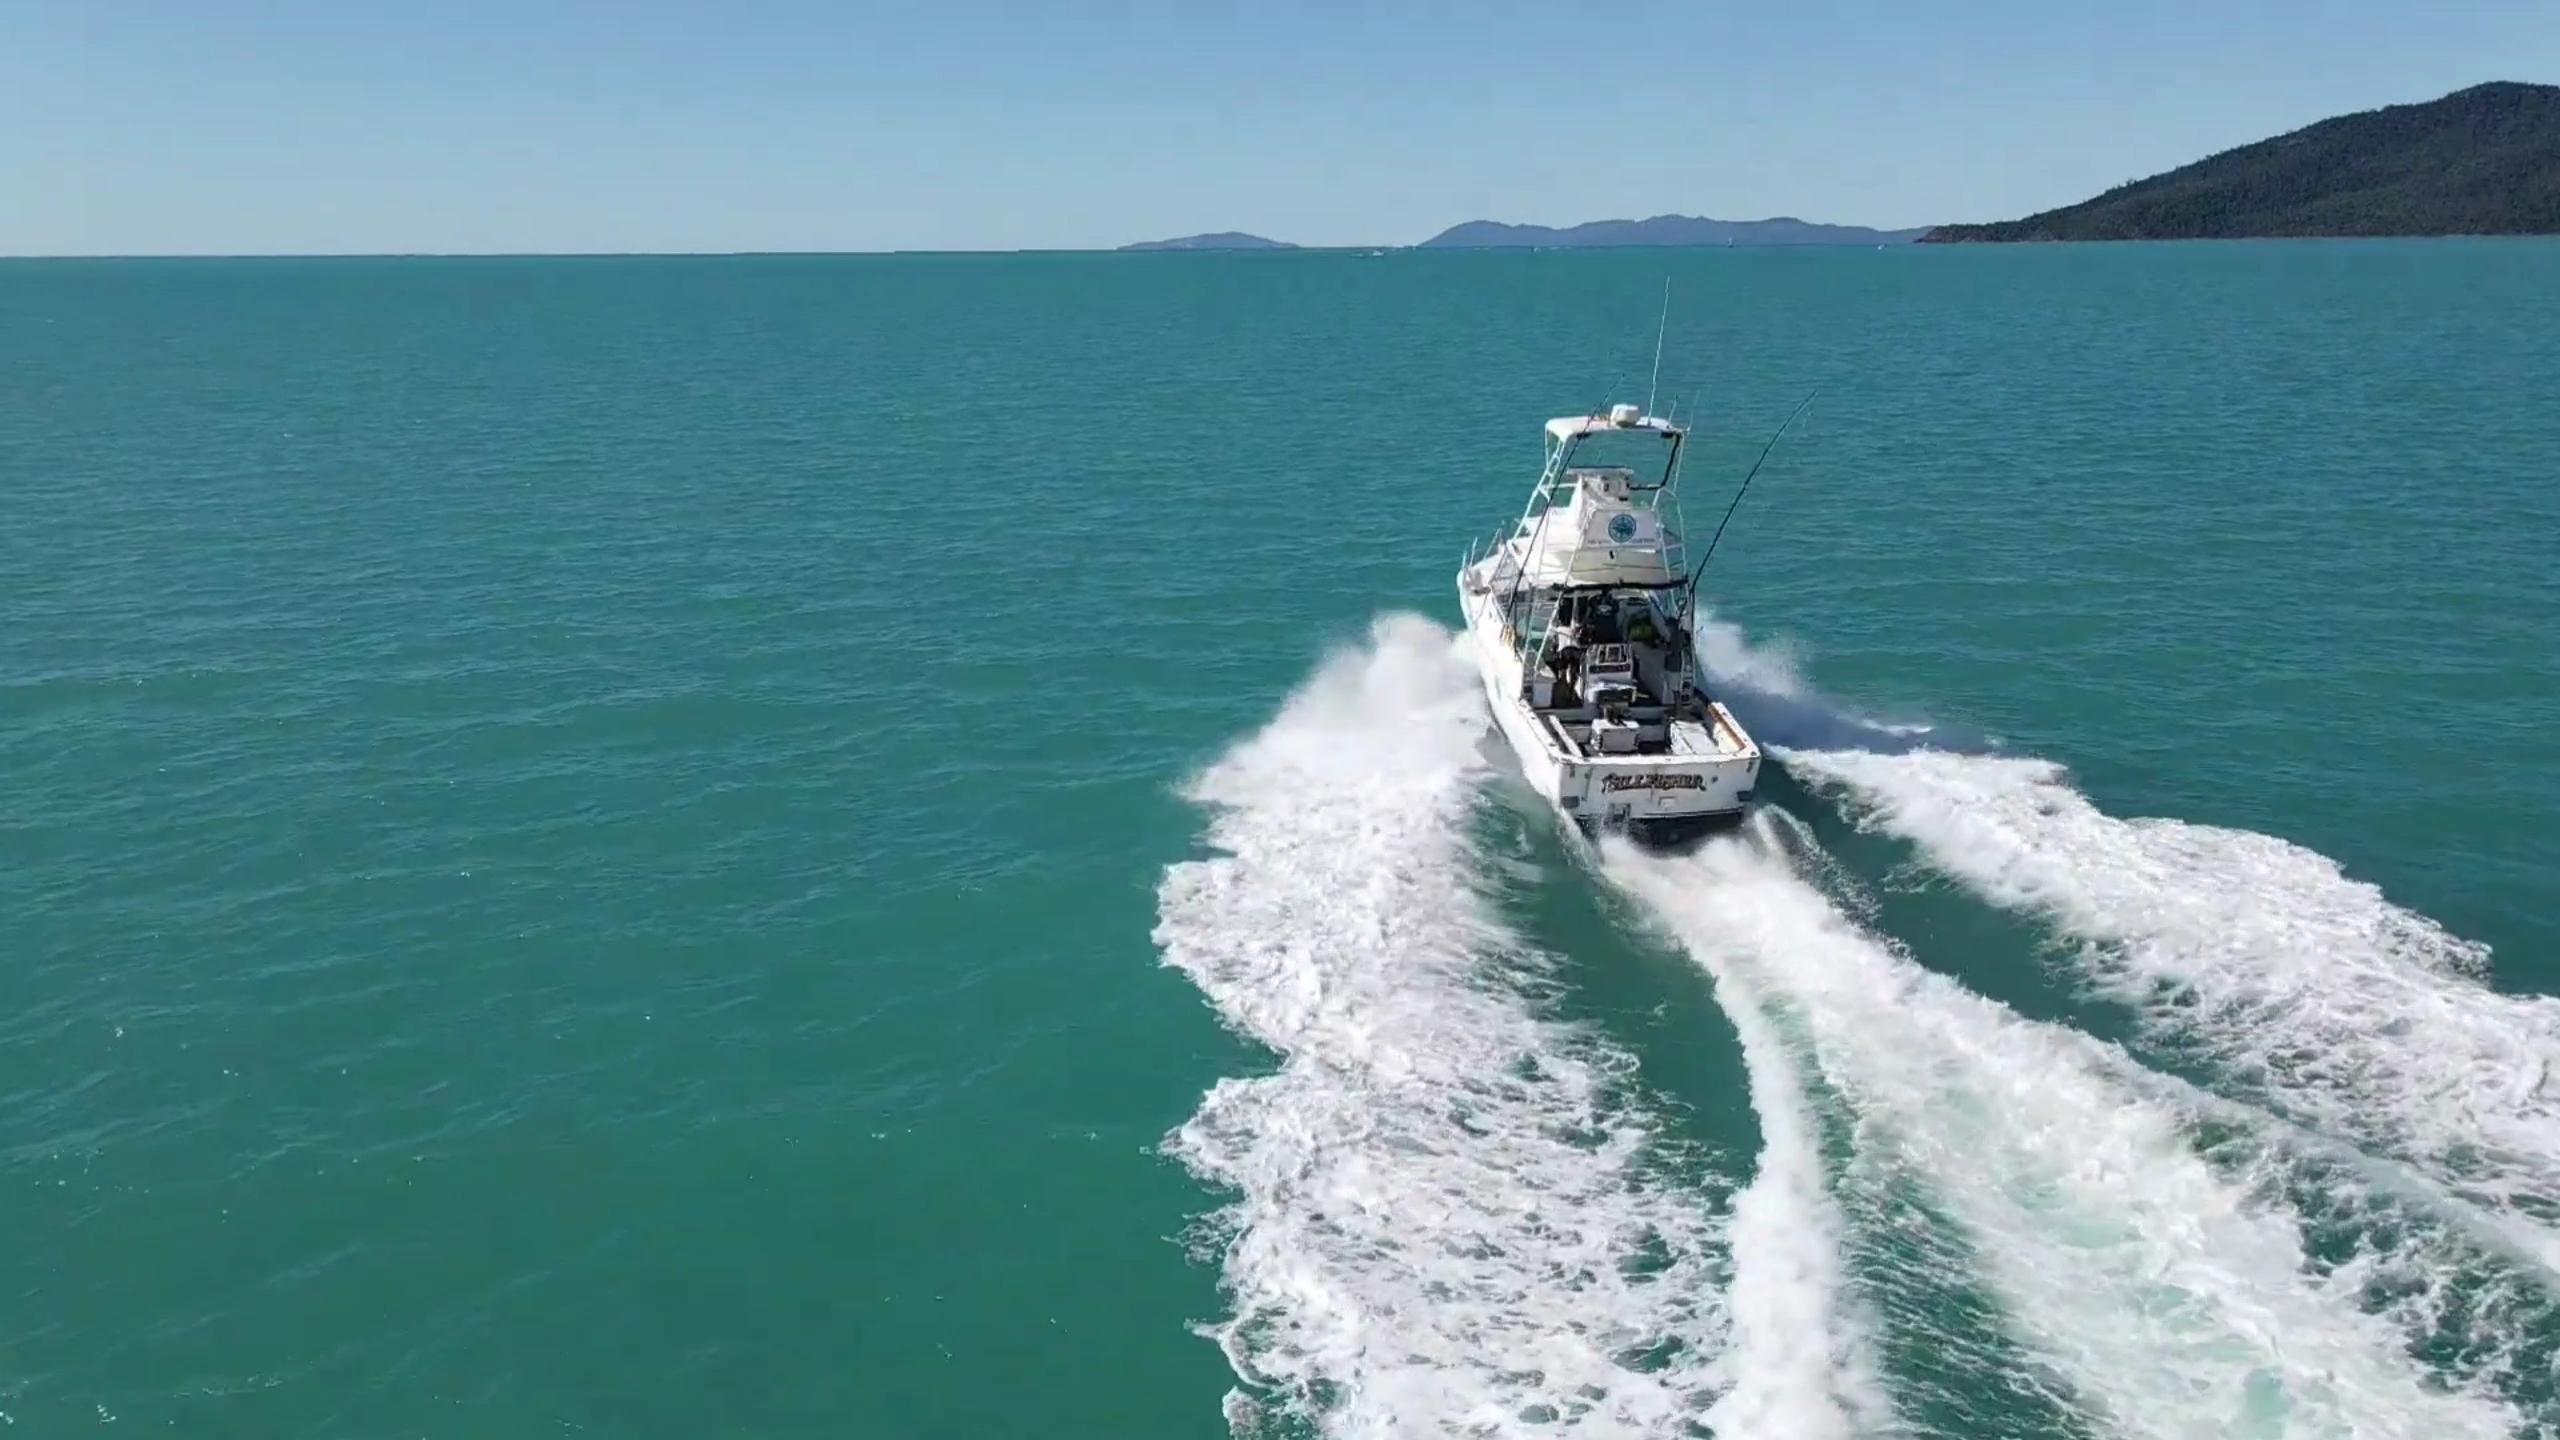 Full Day Private Fishing Charter Airlie Beach Whitsunday Islands & Shoals